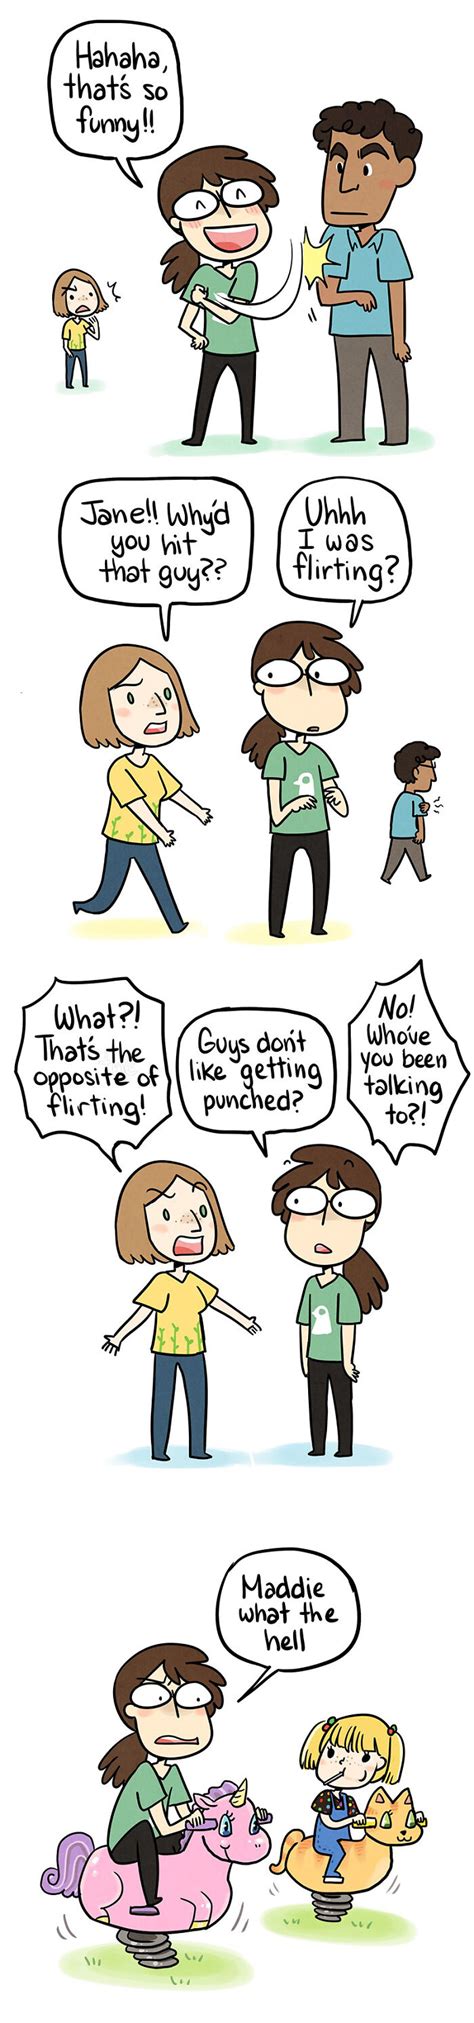 Artist Creates Funny Comics That Relatable To Socially Awkward People